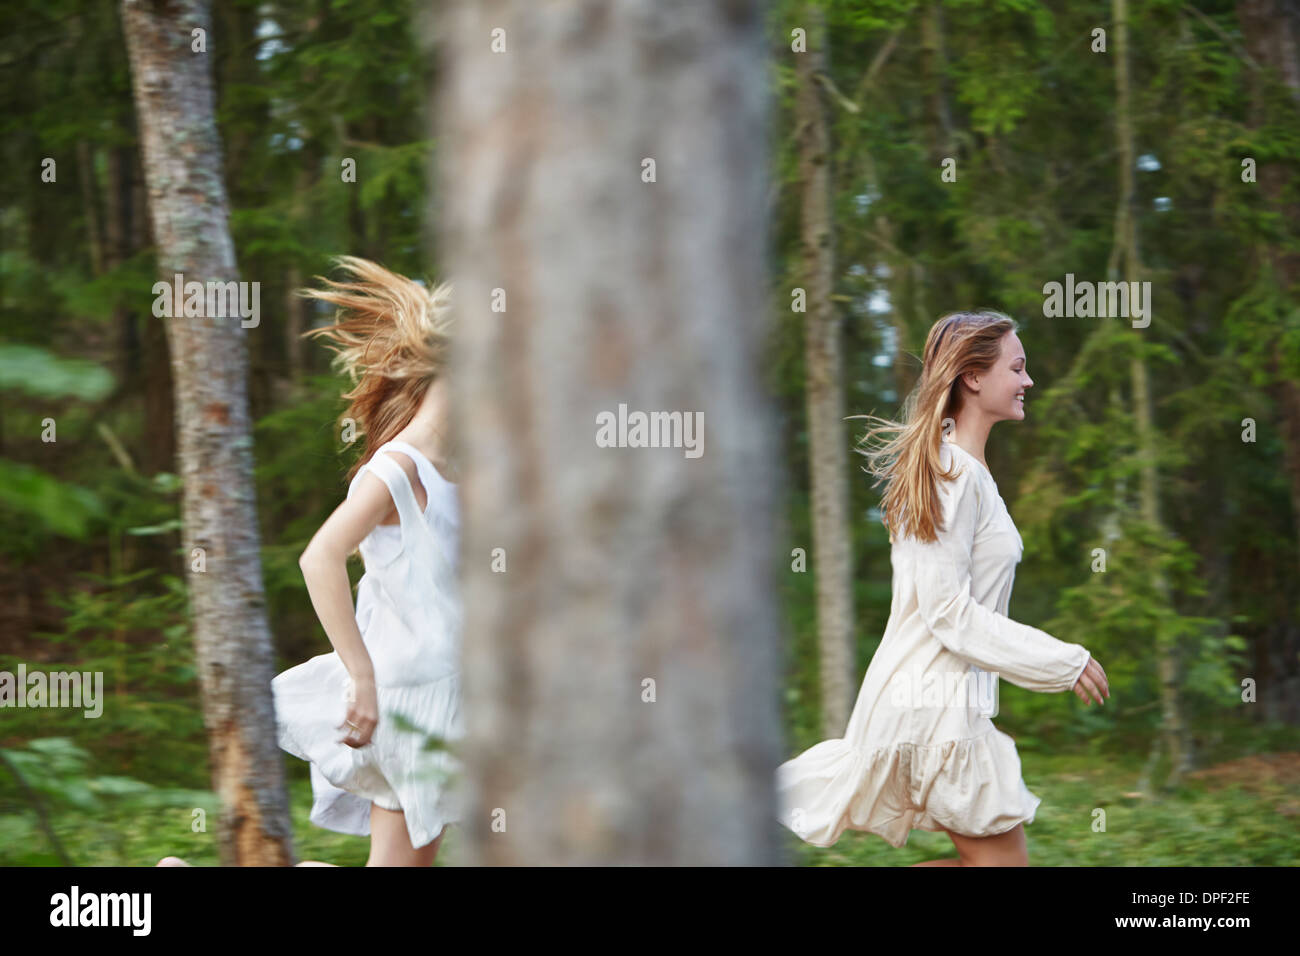 Teenage girls running in forest Stock Photo